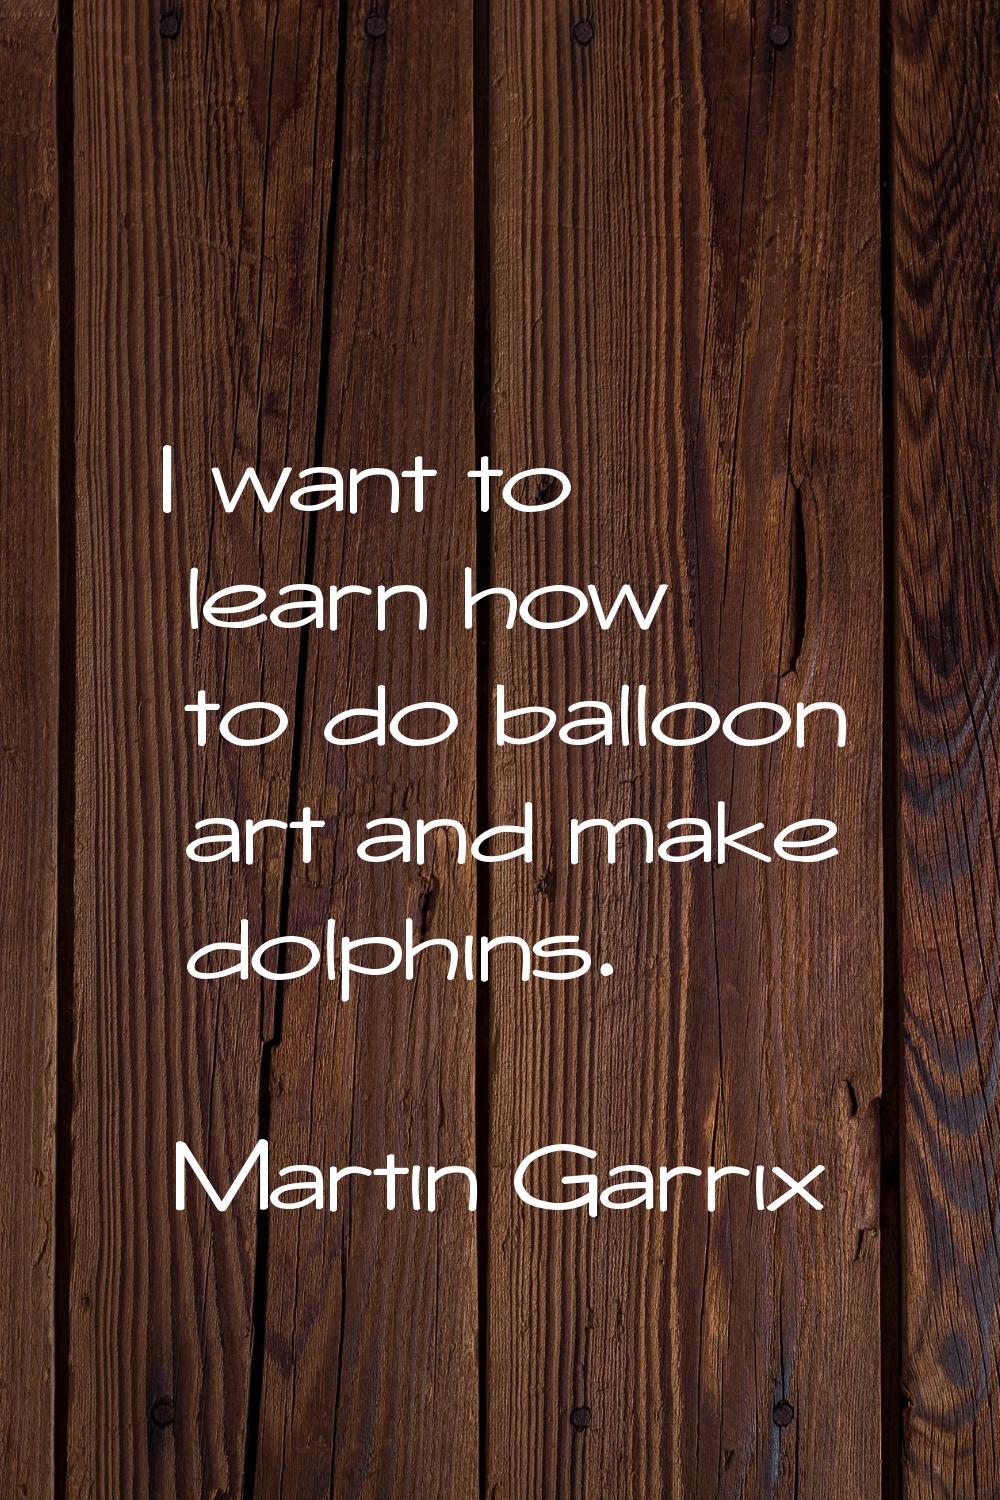 I want to learn how to do balloon art and make dolphins.